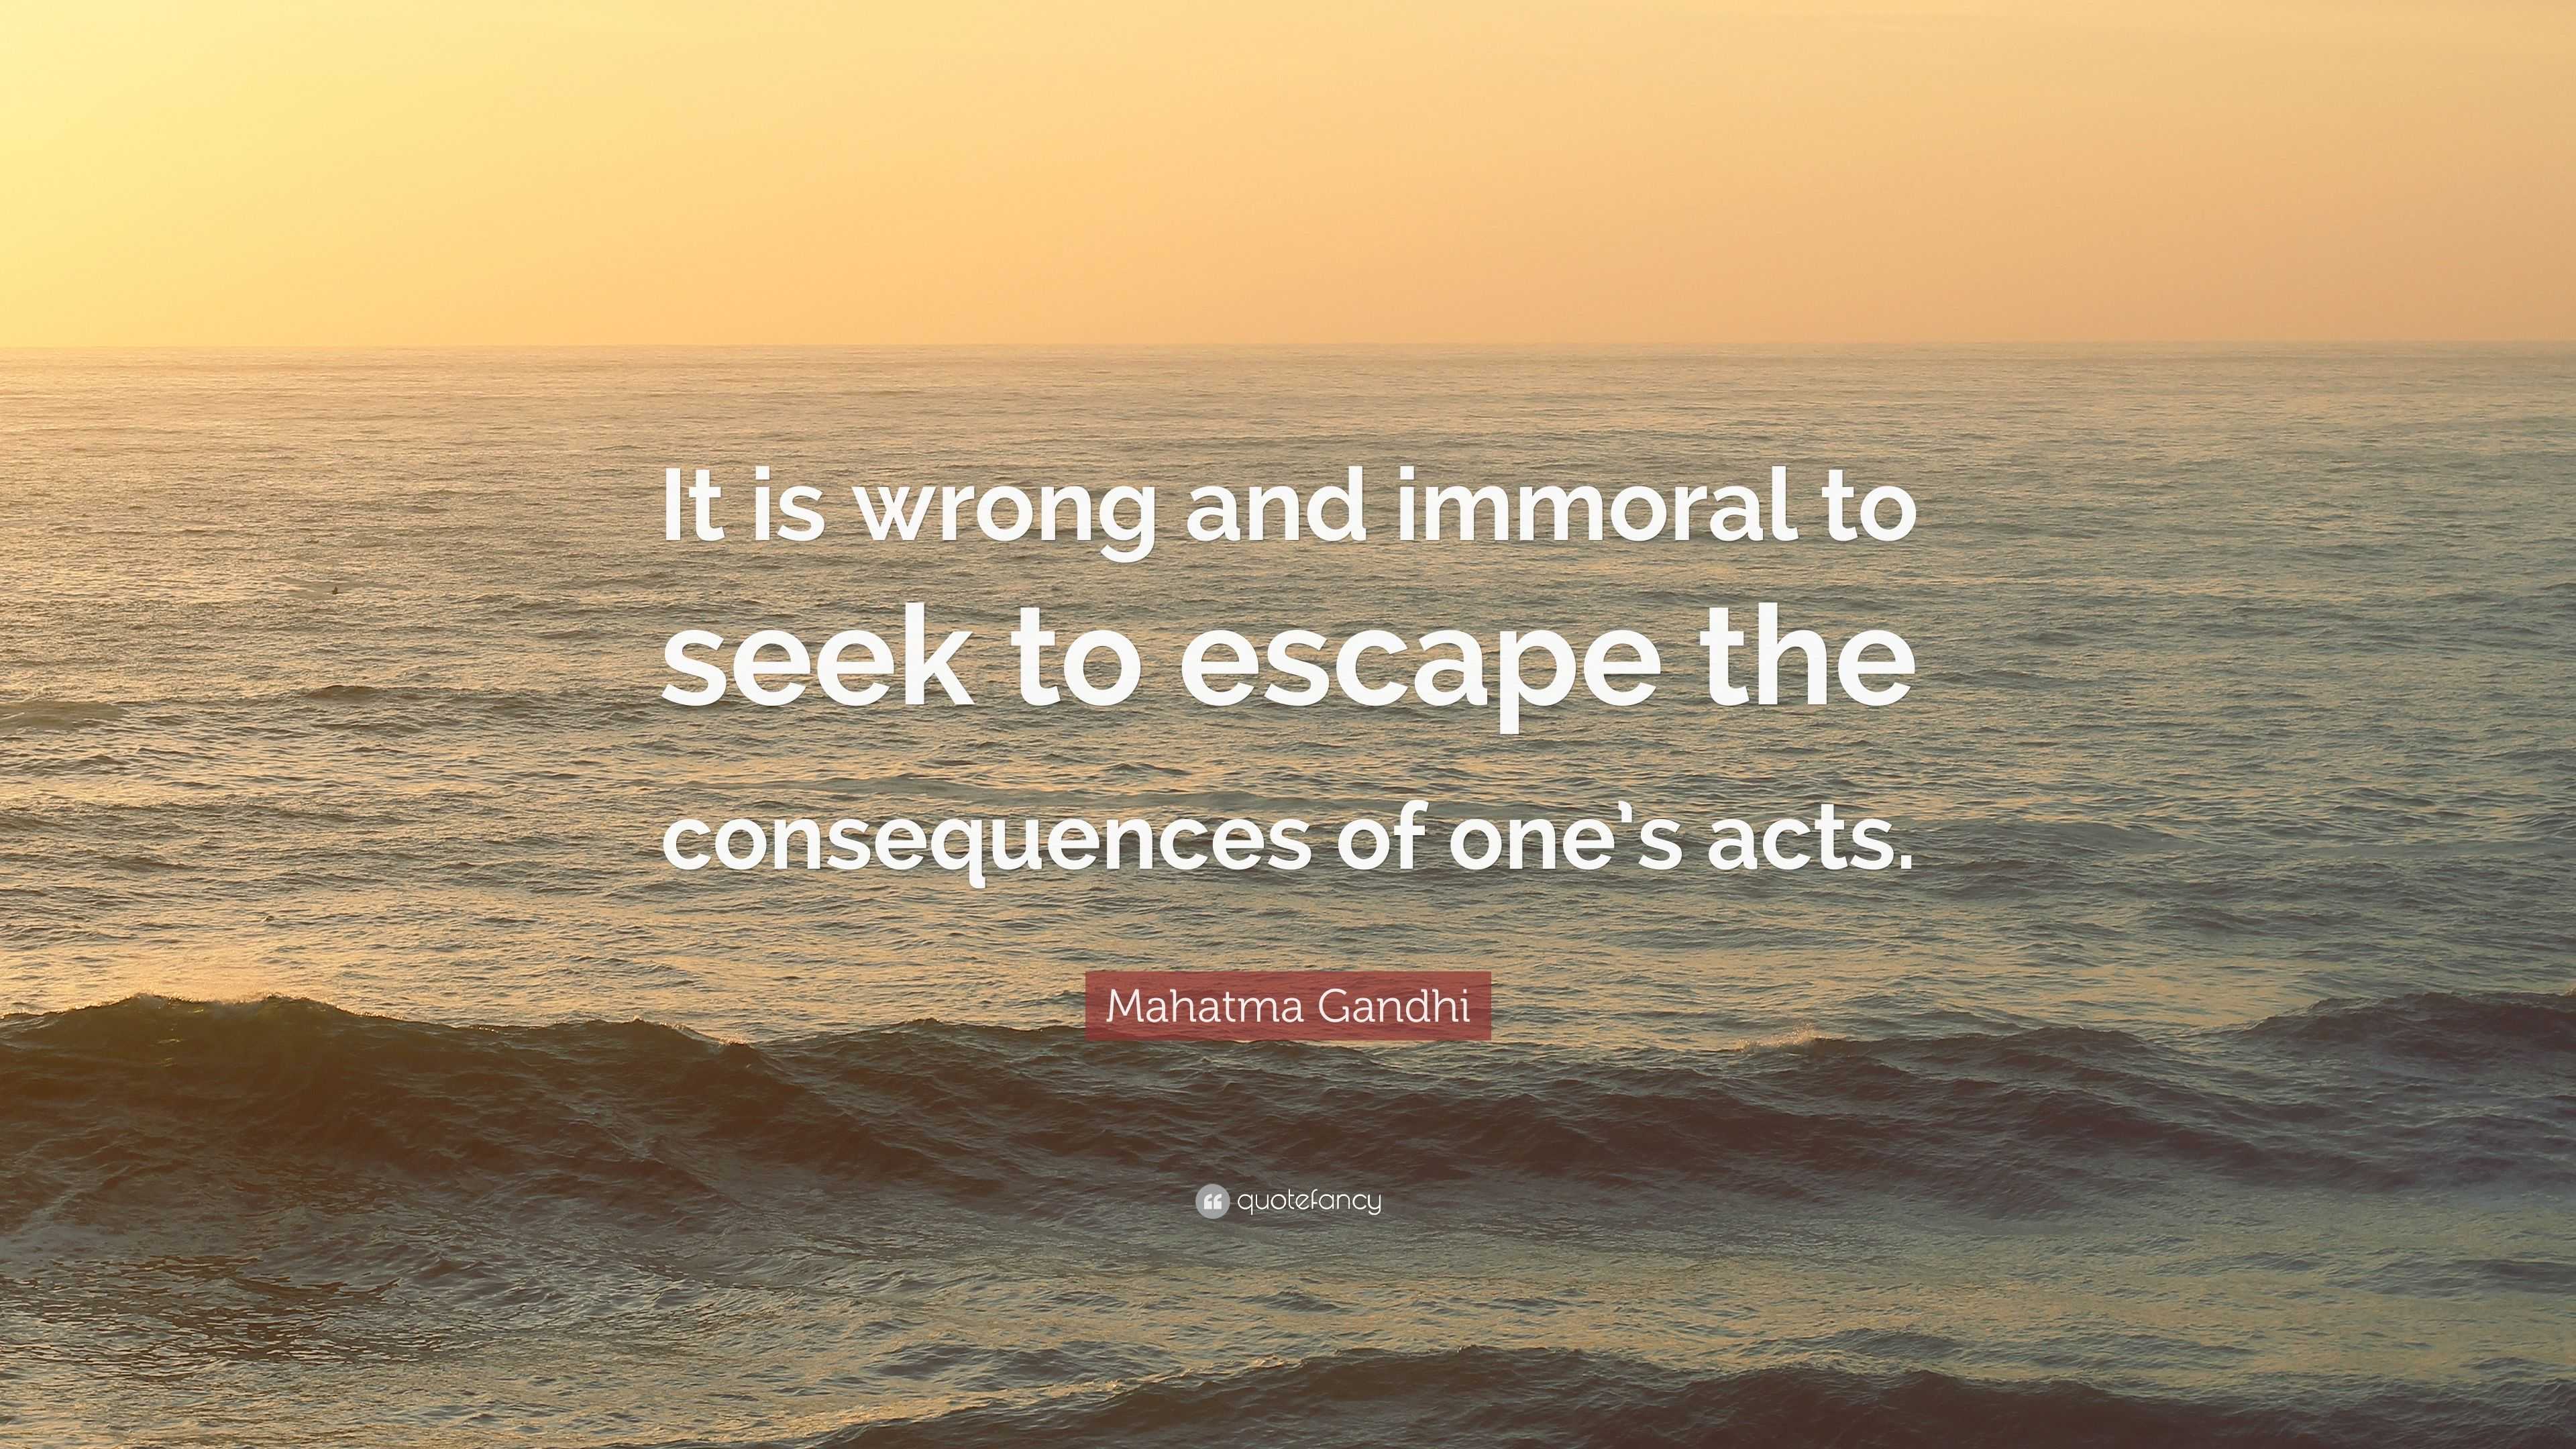 Mahatma Gandhi Quote: “It is wrong and immoral to seek to escape the ...